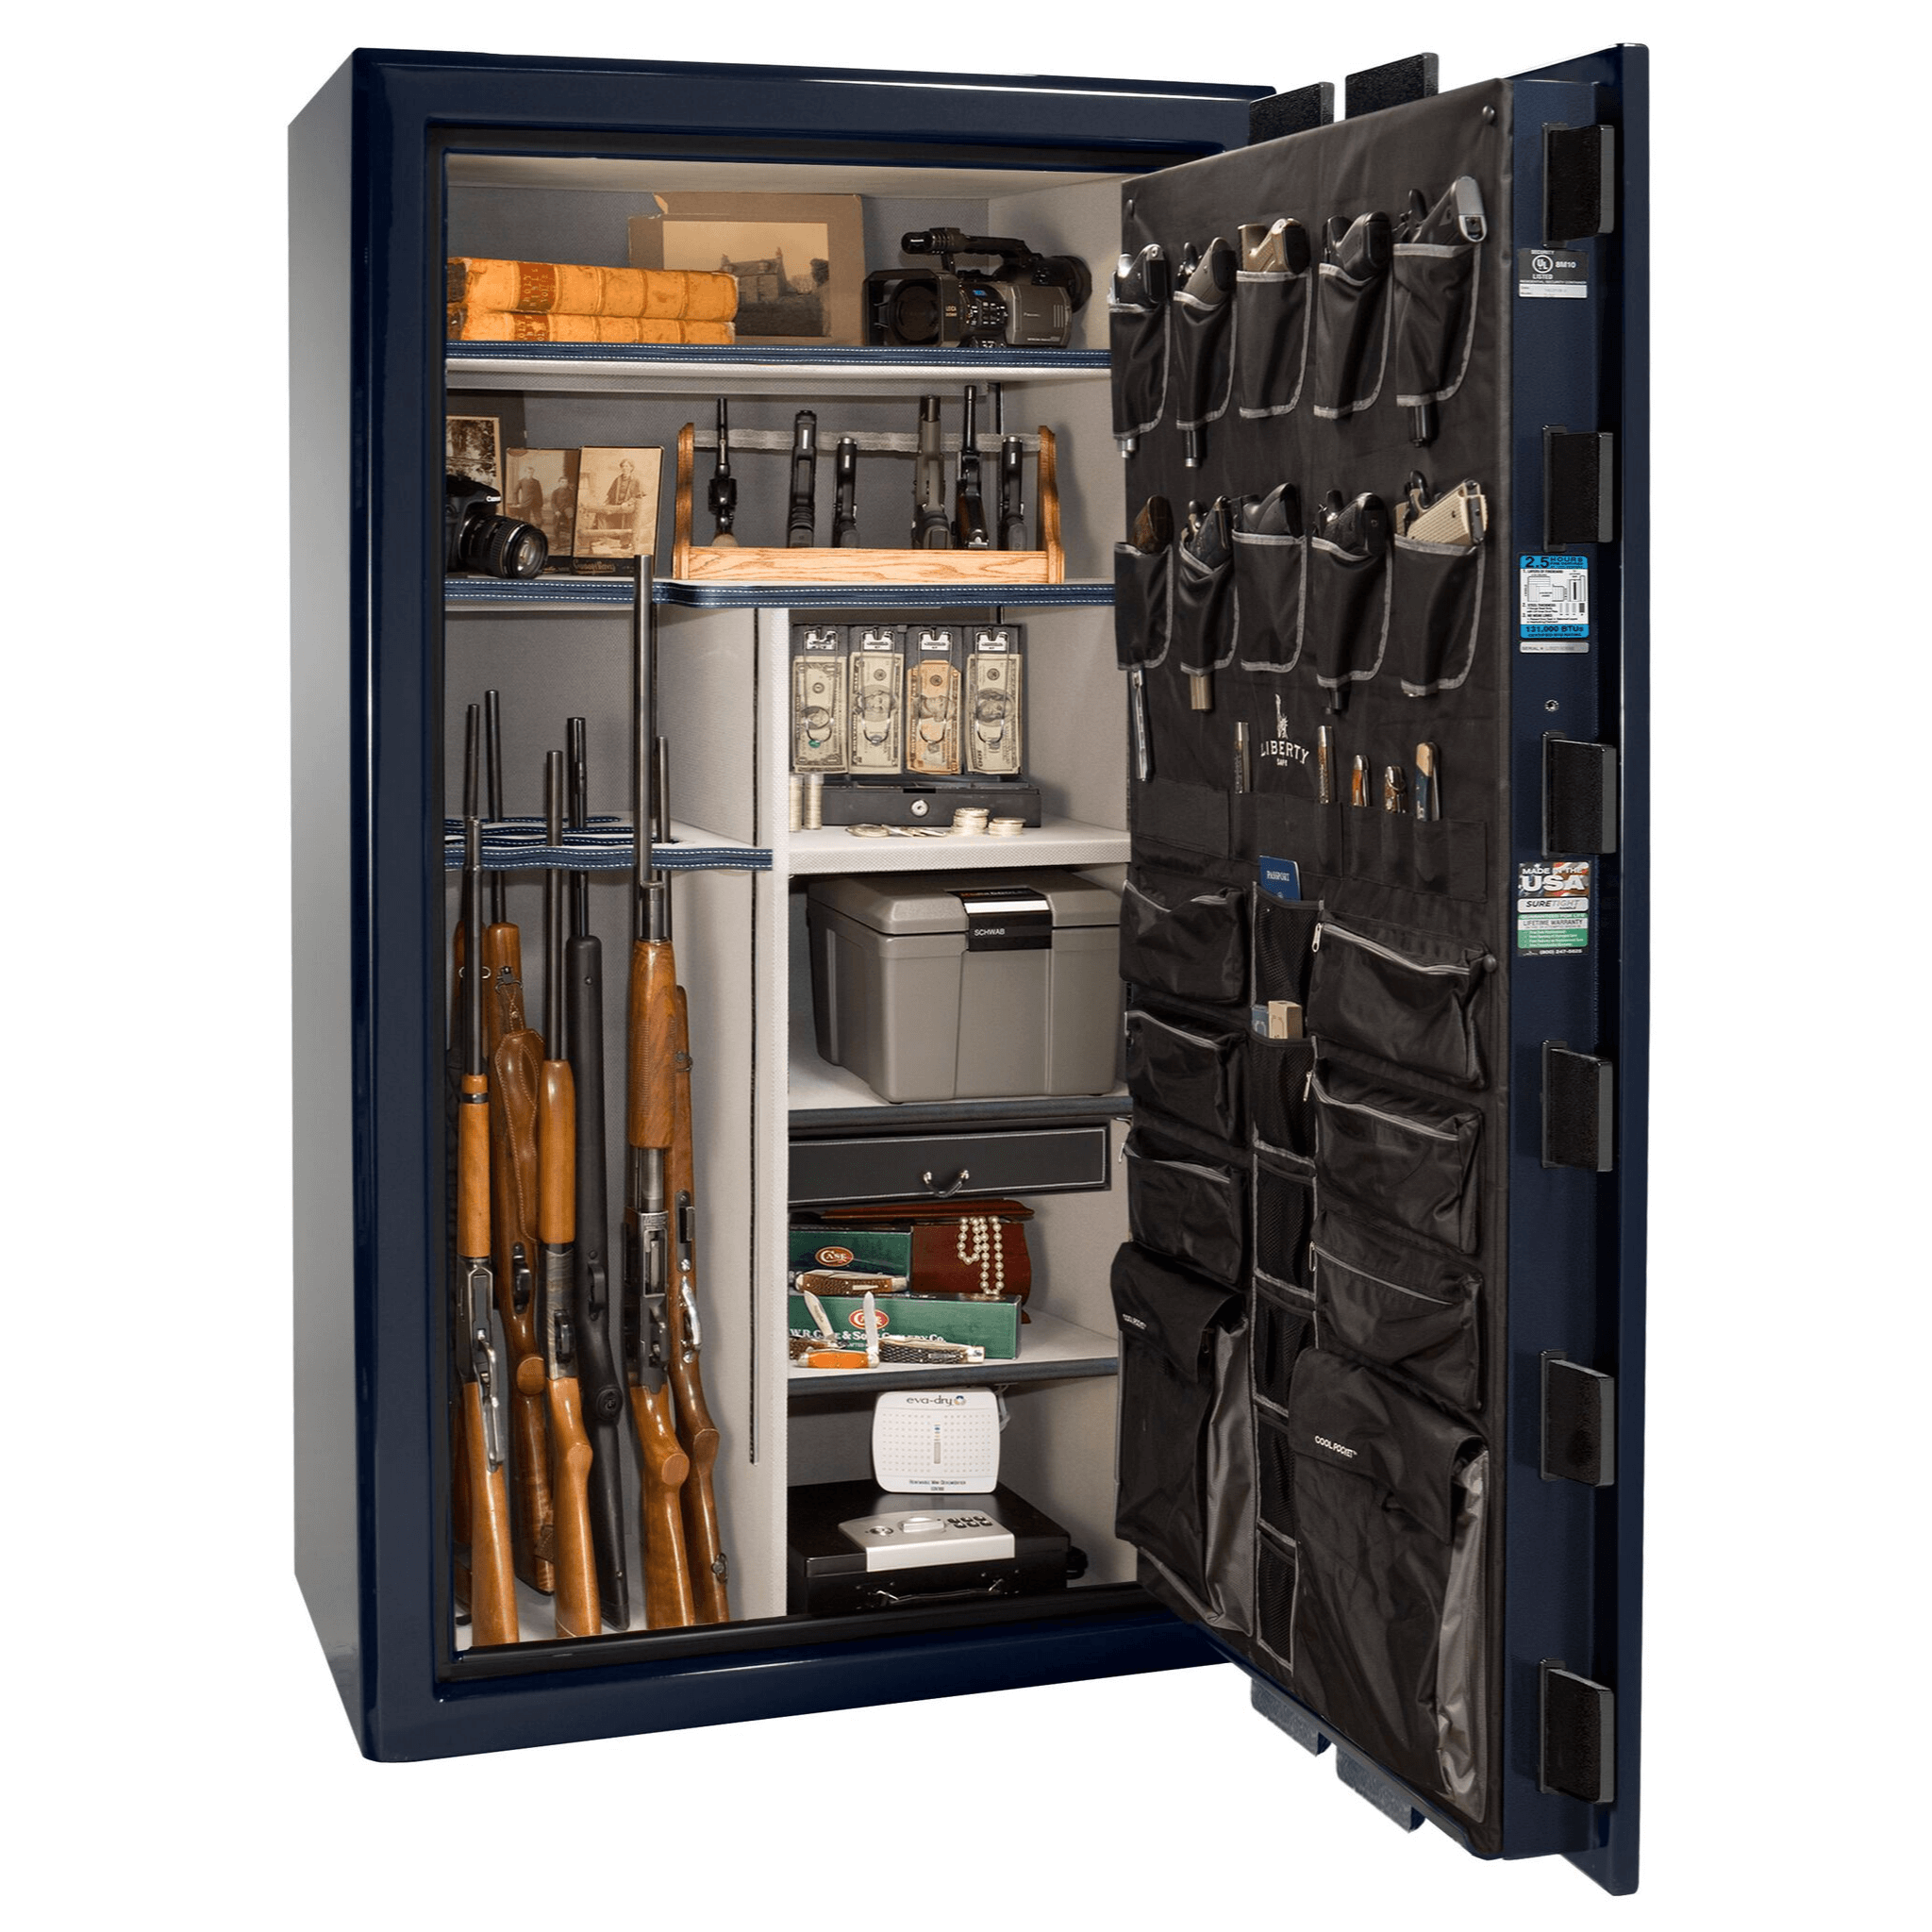 Presidential Series | Level 8 Security | 2.5 Hours Fire Protection | 50 | Dimensions: 72.5"(H) x 42.25"(W) x 32"(D) | Blue Gloss | Chrome Hardware | Mechanical Lock